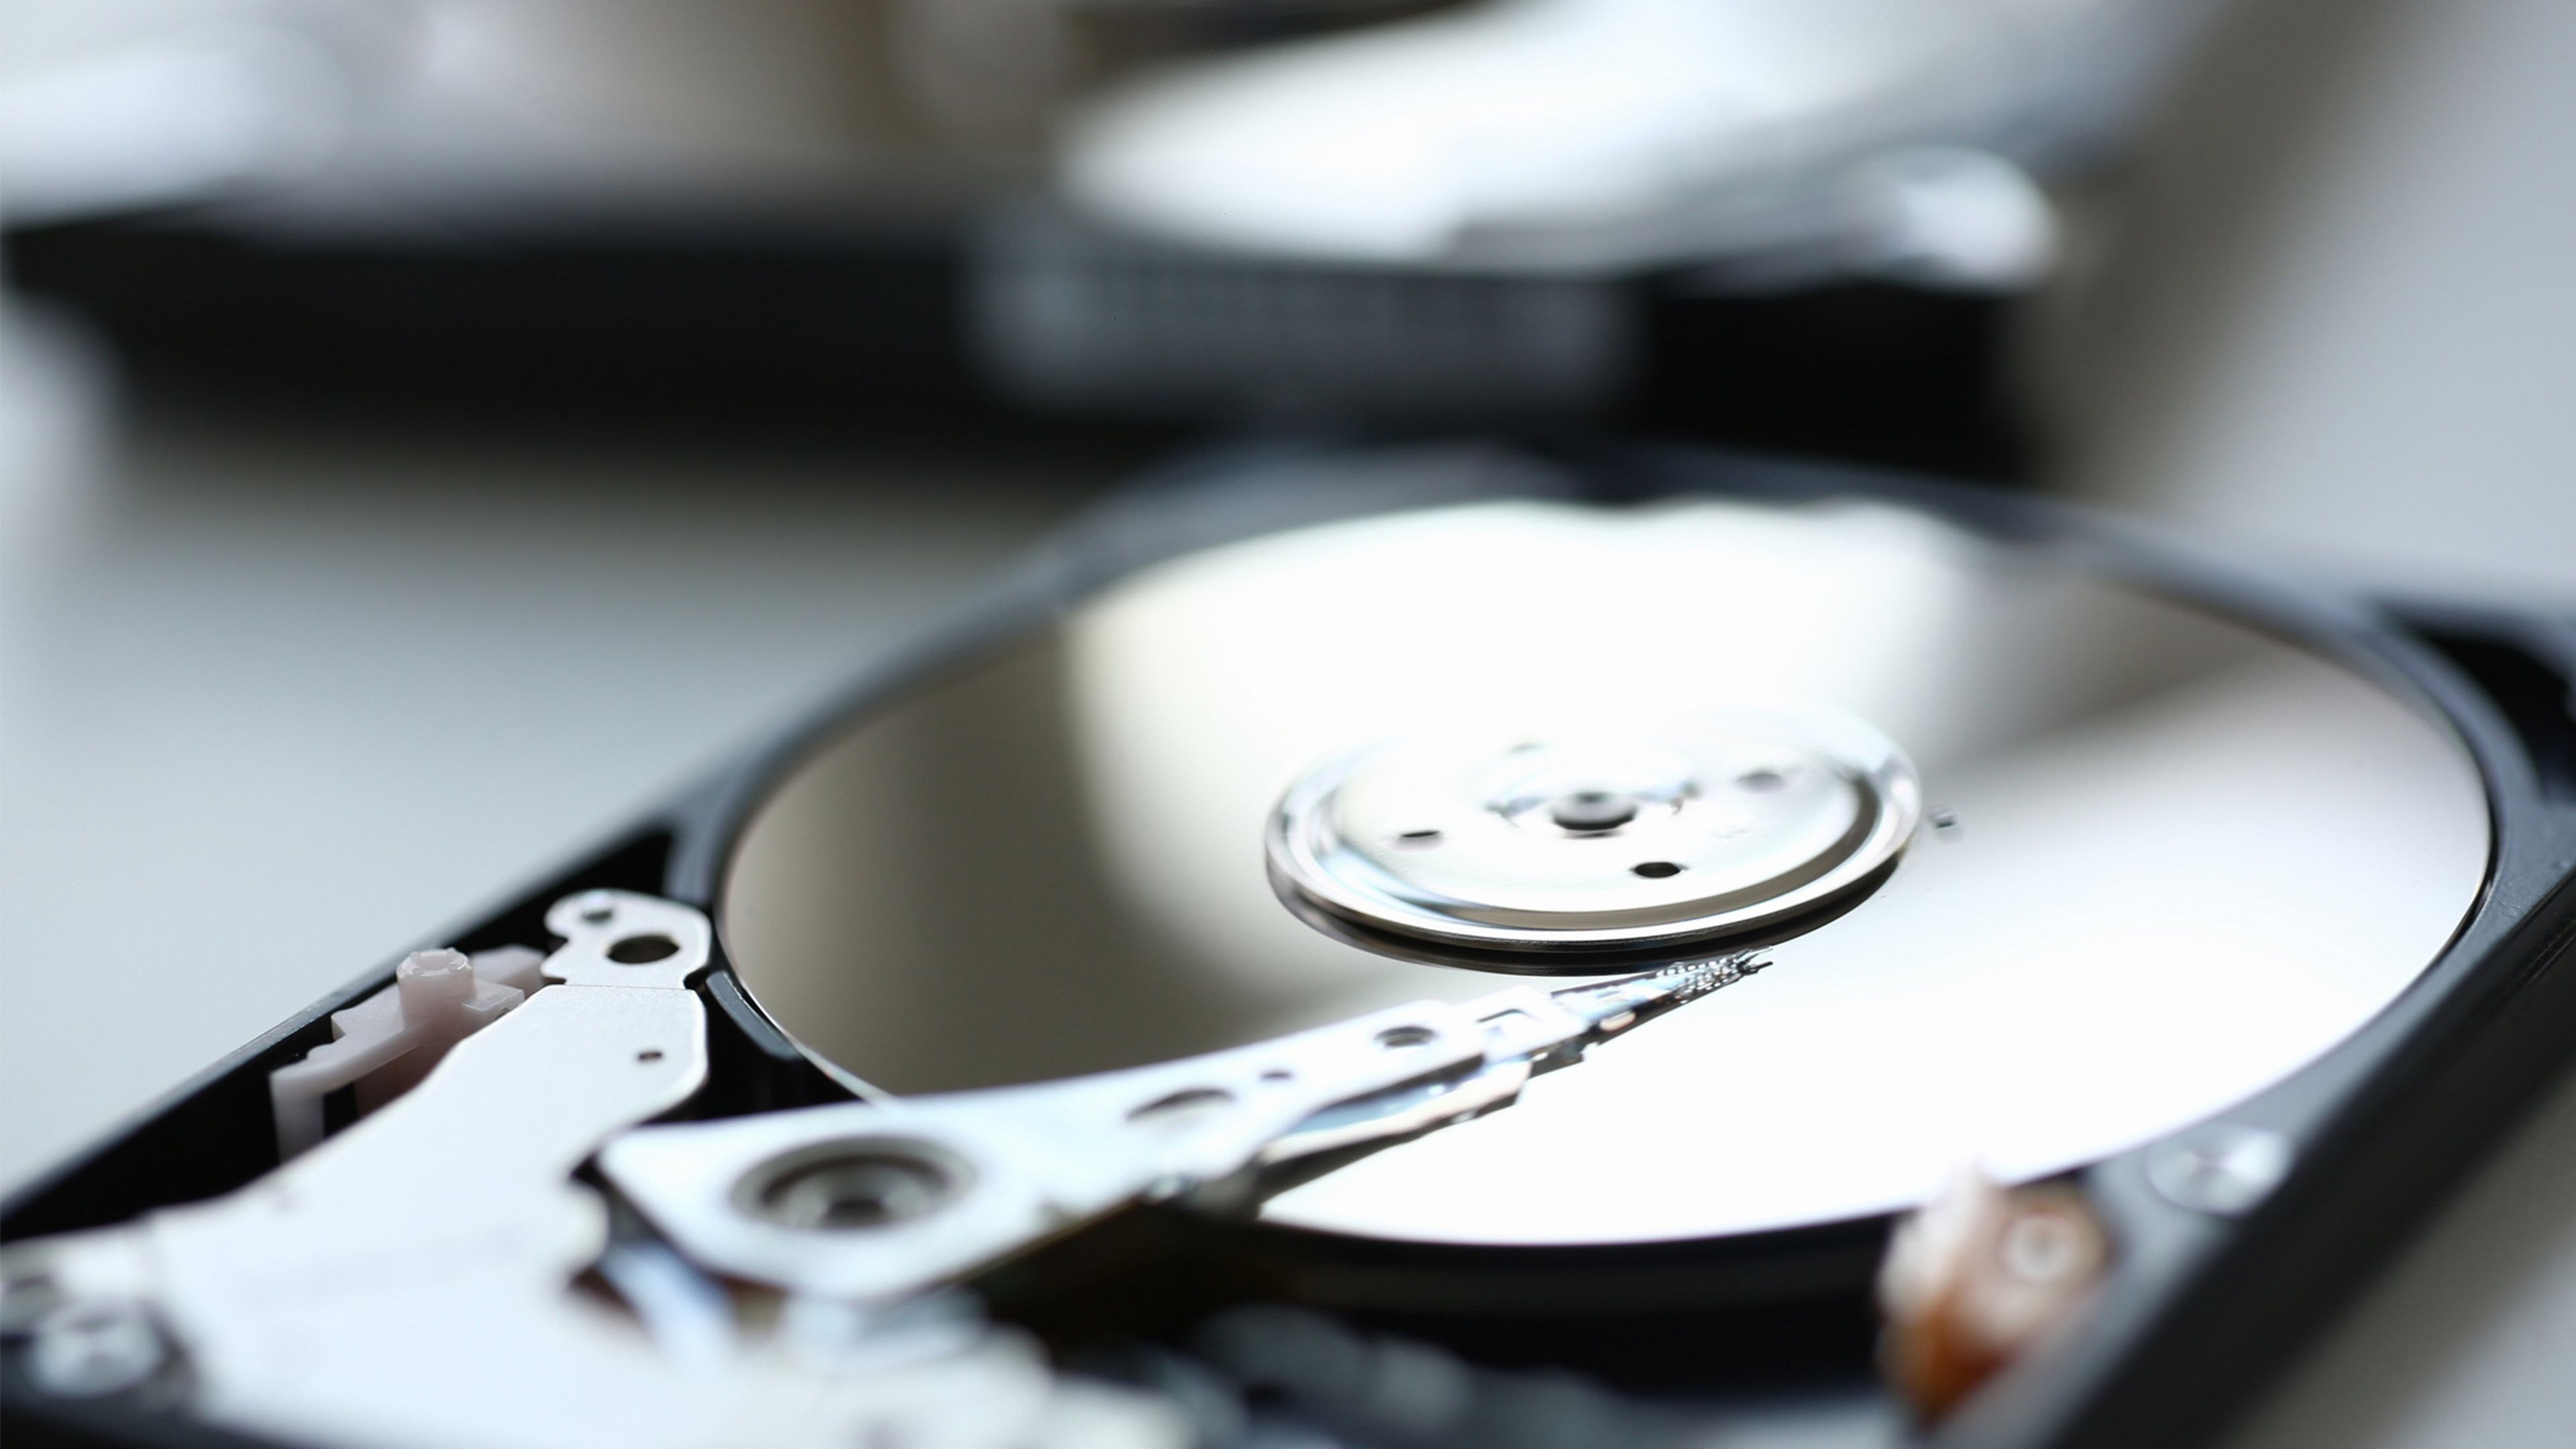 The guide to buying an internal hard drive